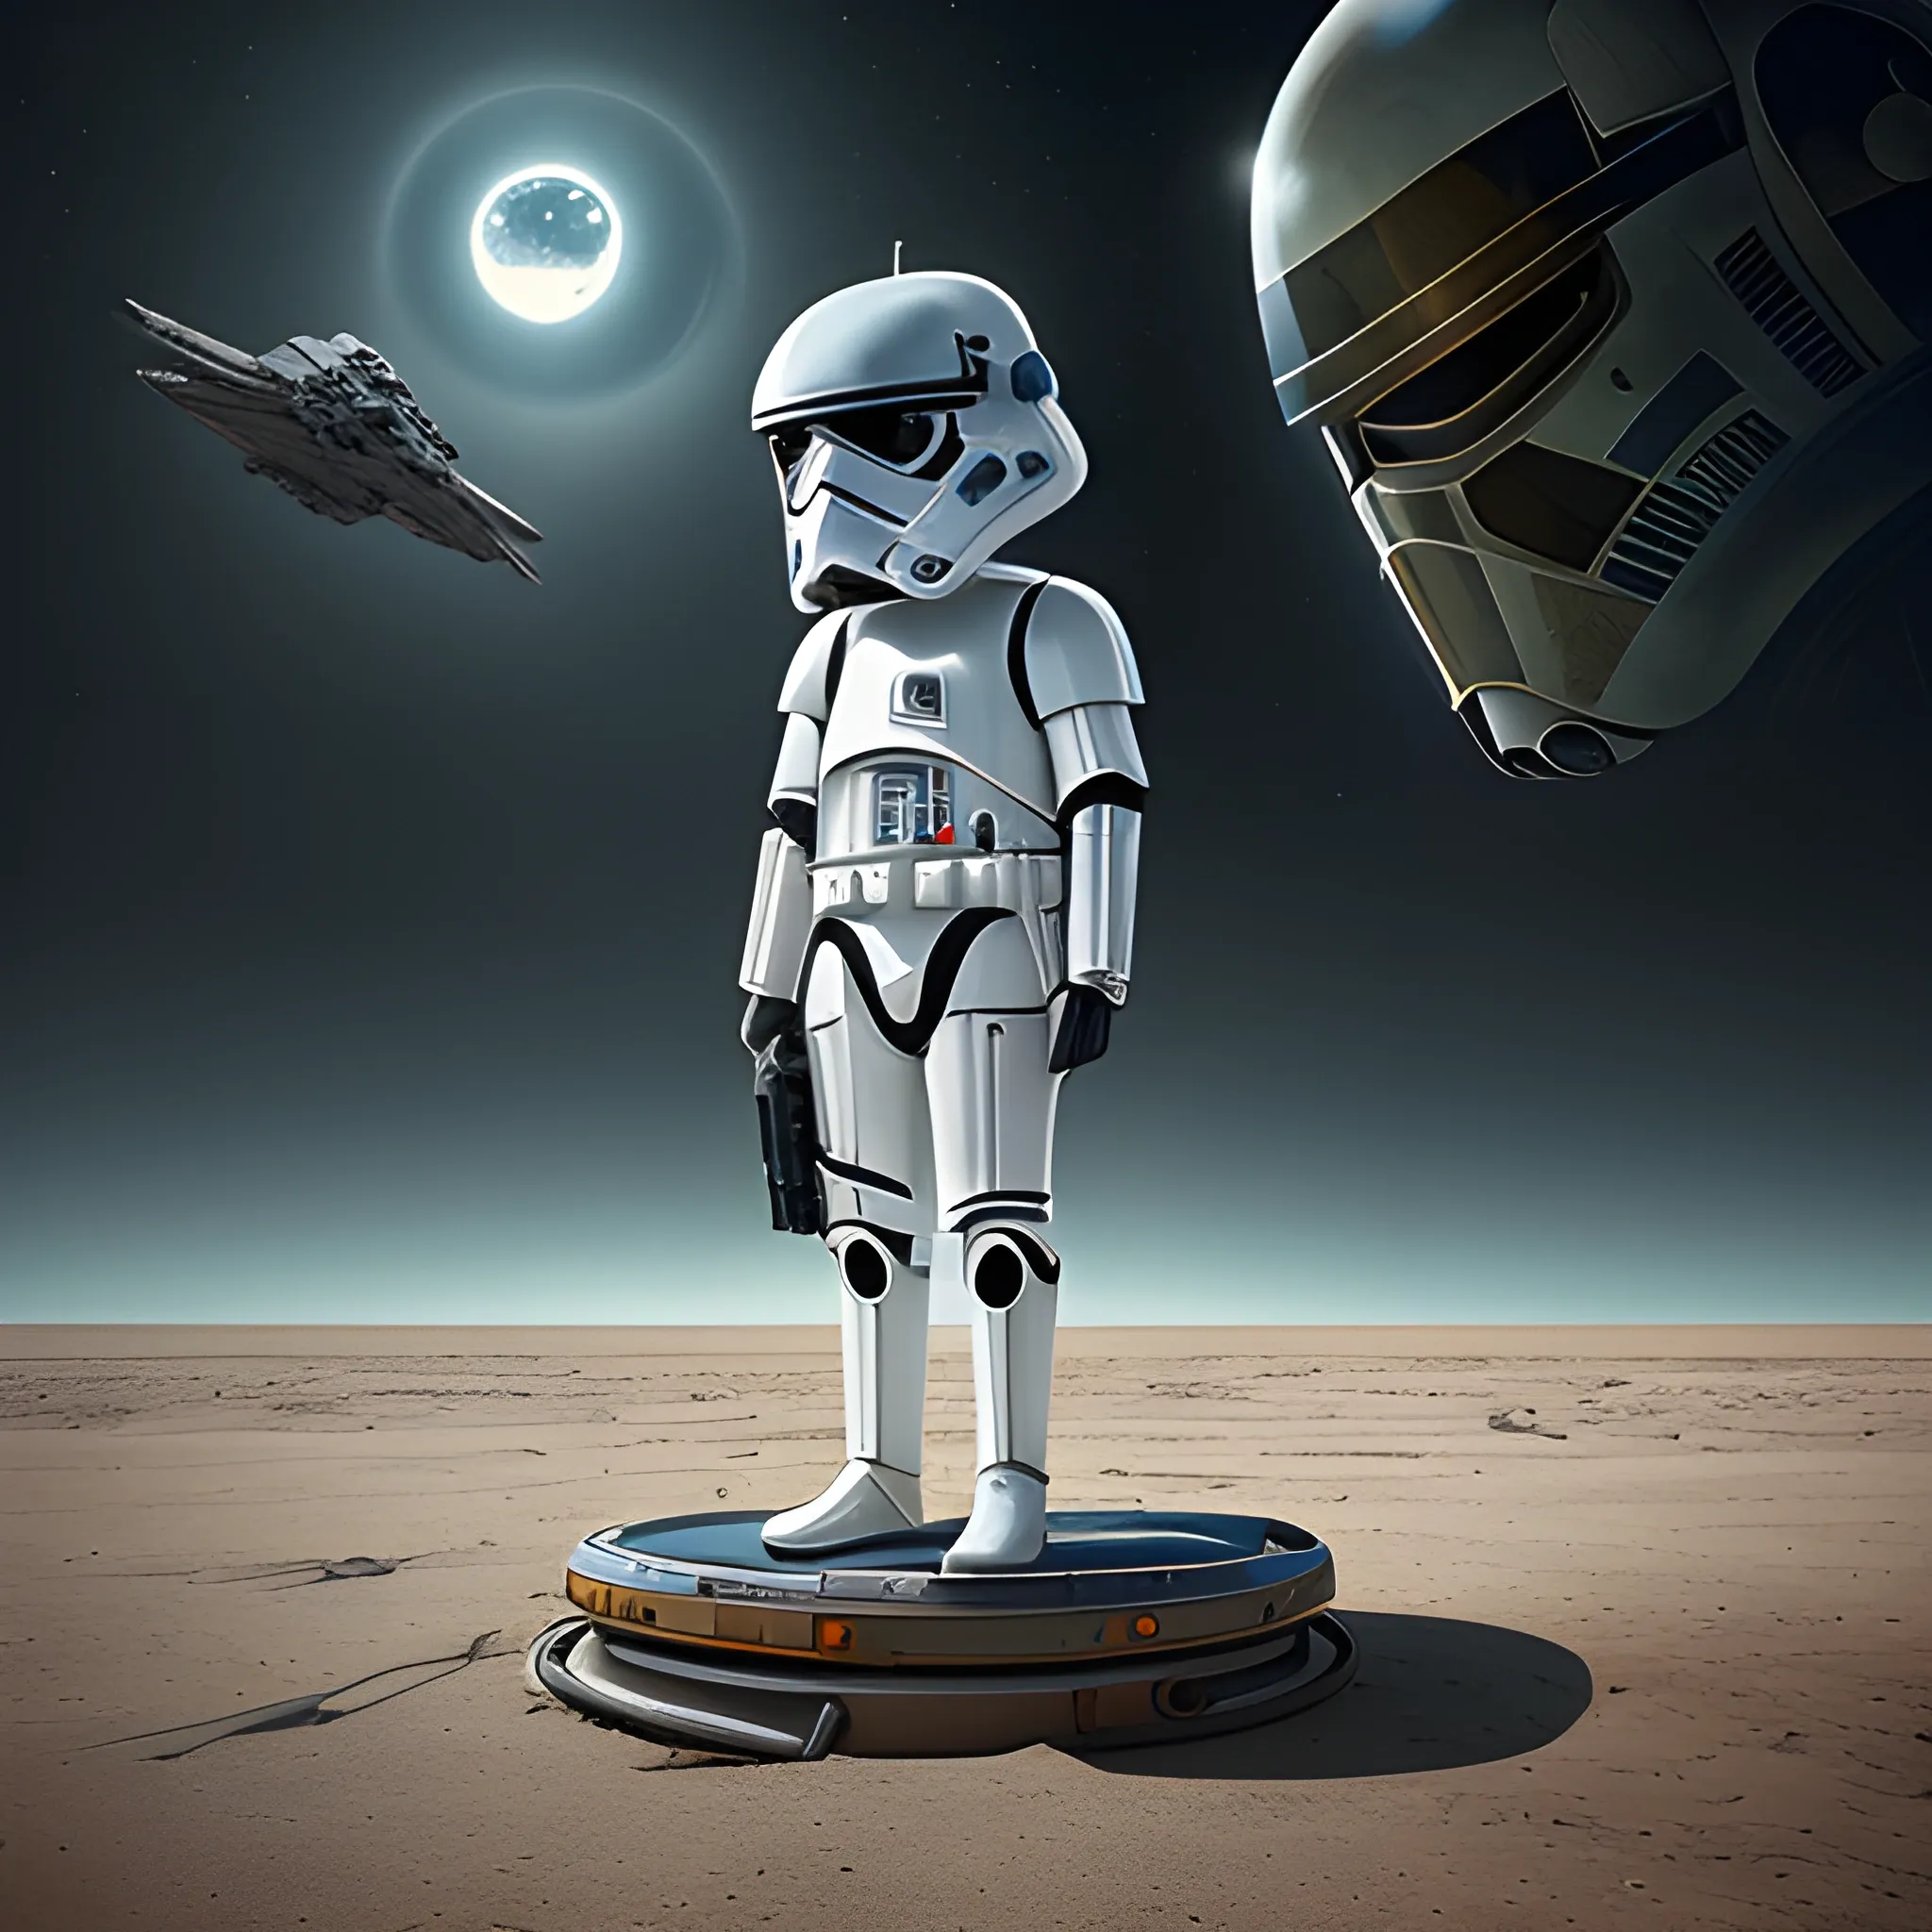 A detailed and intricate digital art piece in a cinematic style, this ultra high resolution portrait of a star wars-like alien standing on a landing pad with a spacesuit on and tge helmet in hand